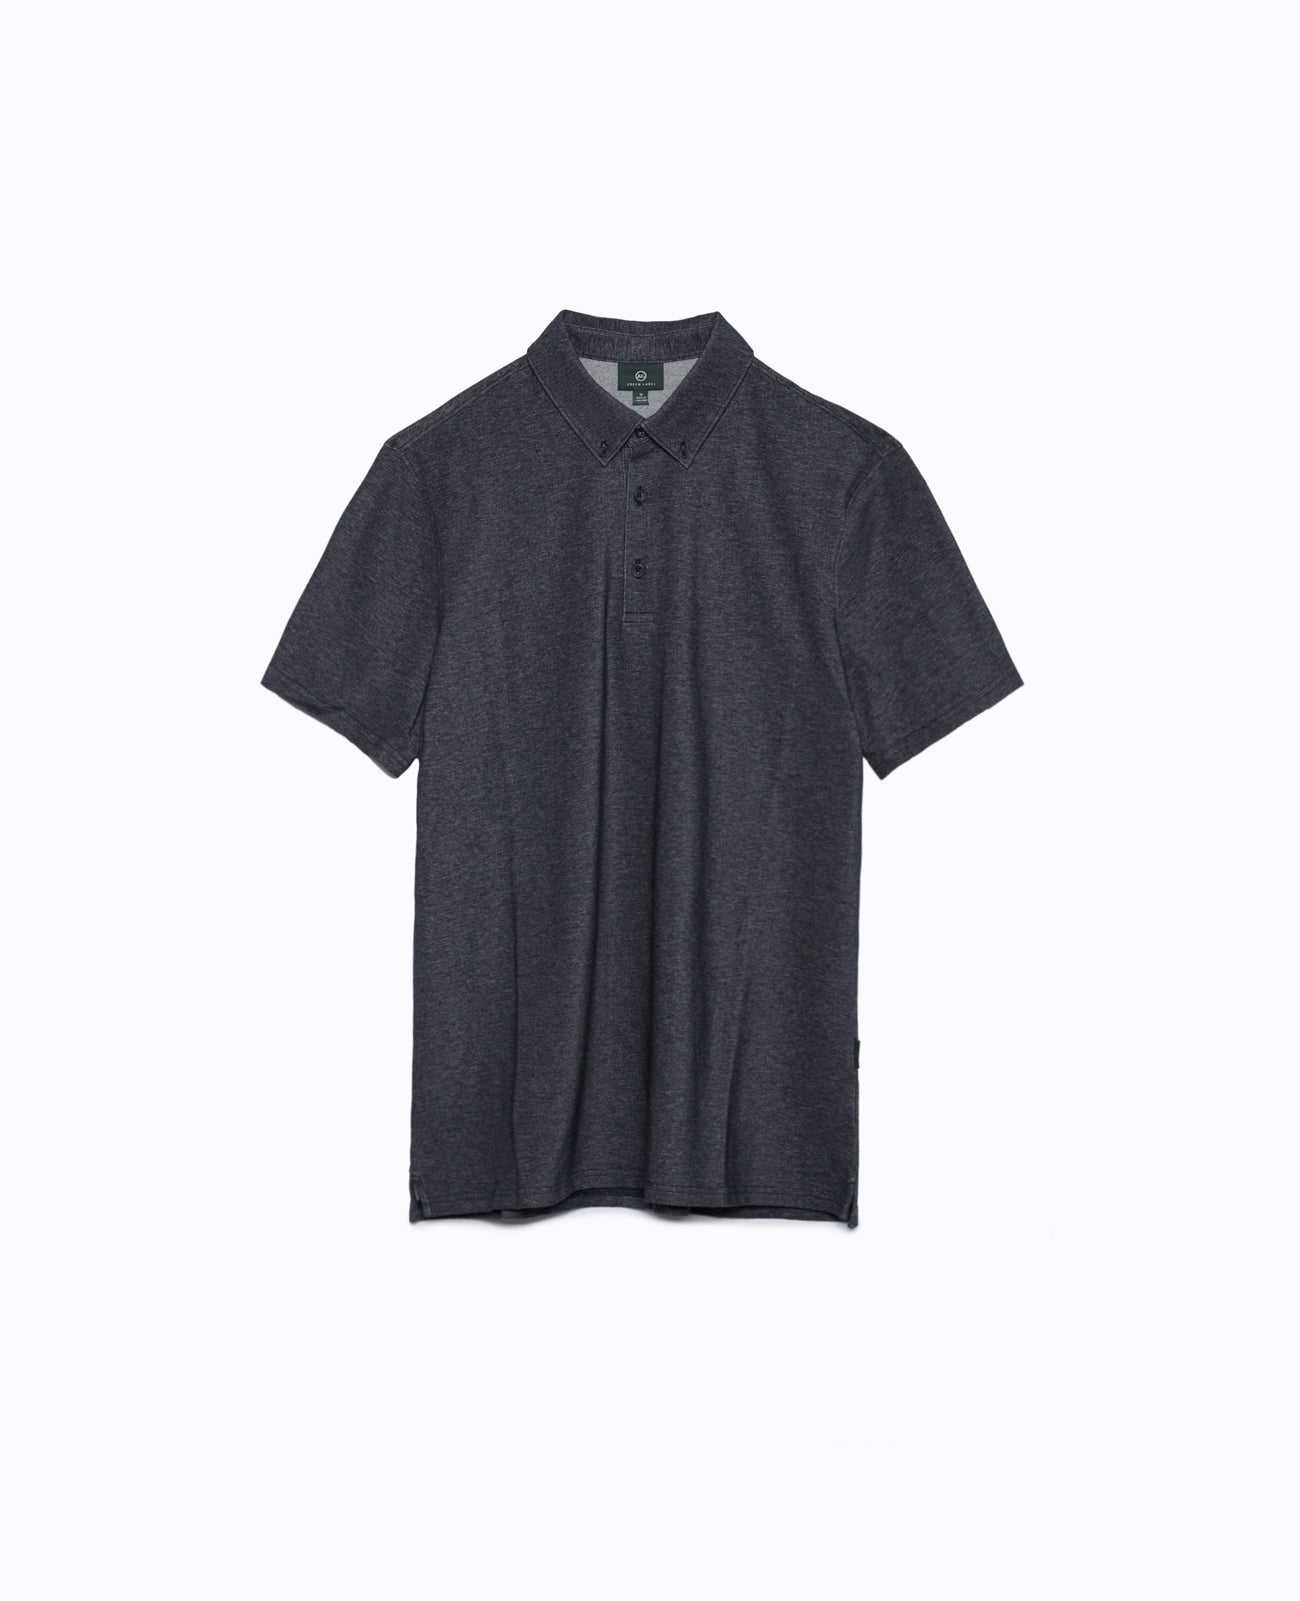 Mensa Polo Heathered Naval Blue Green Label Collection Men Tops Photo 6